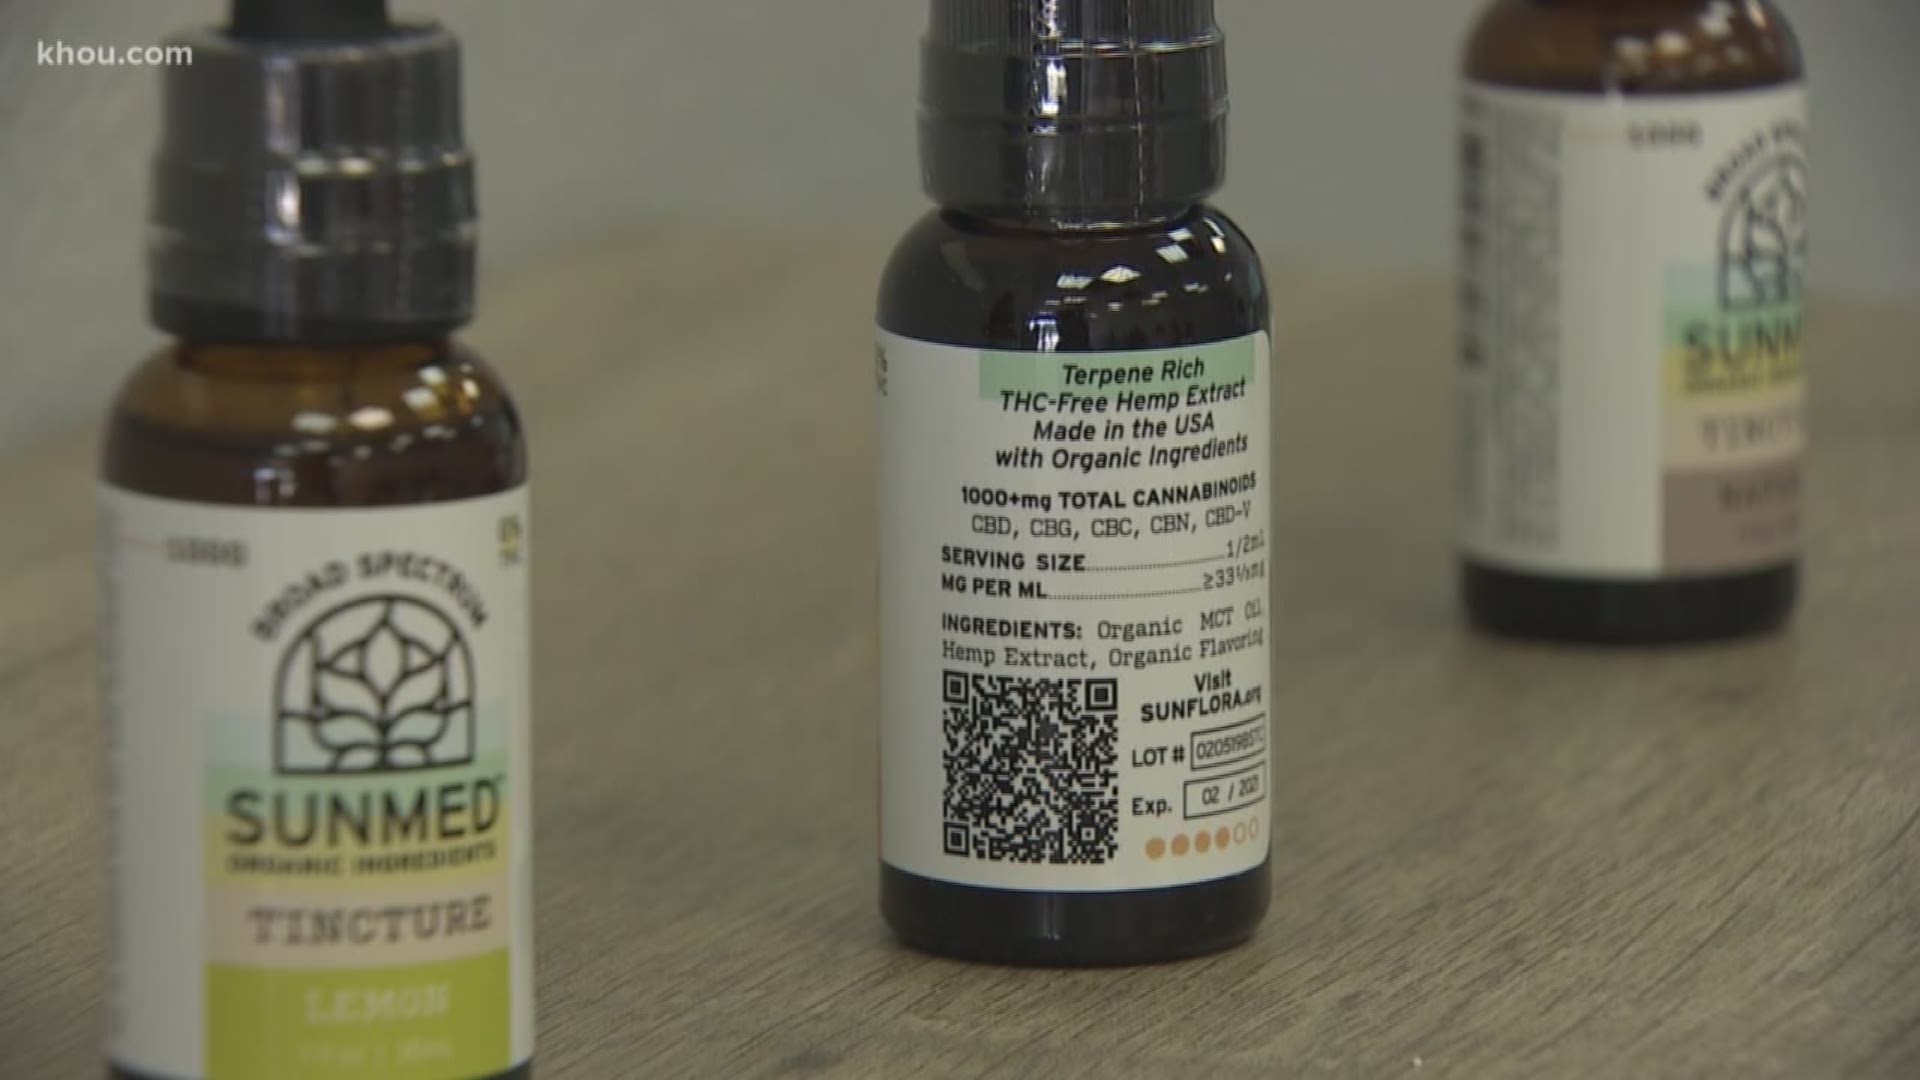 CBD products can still be tricky when traveling based on current regulations.